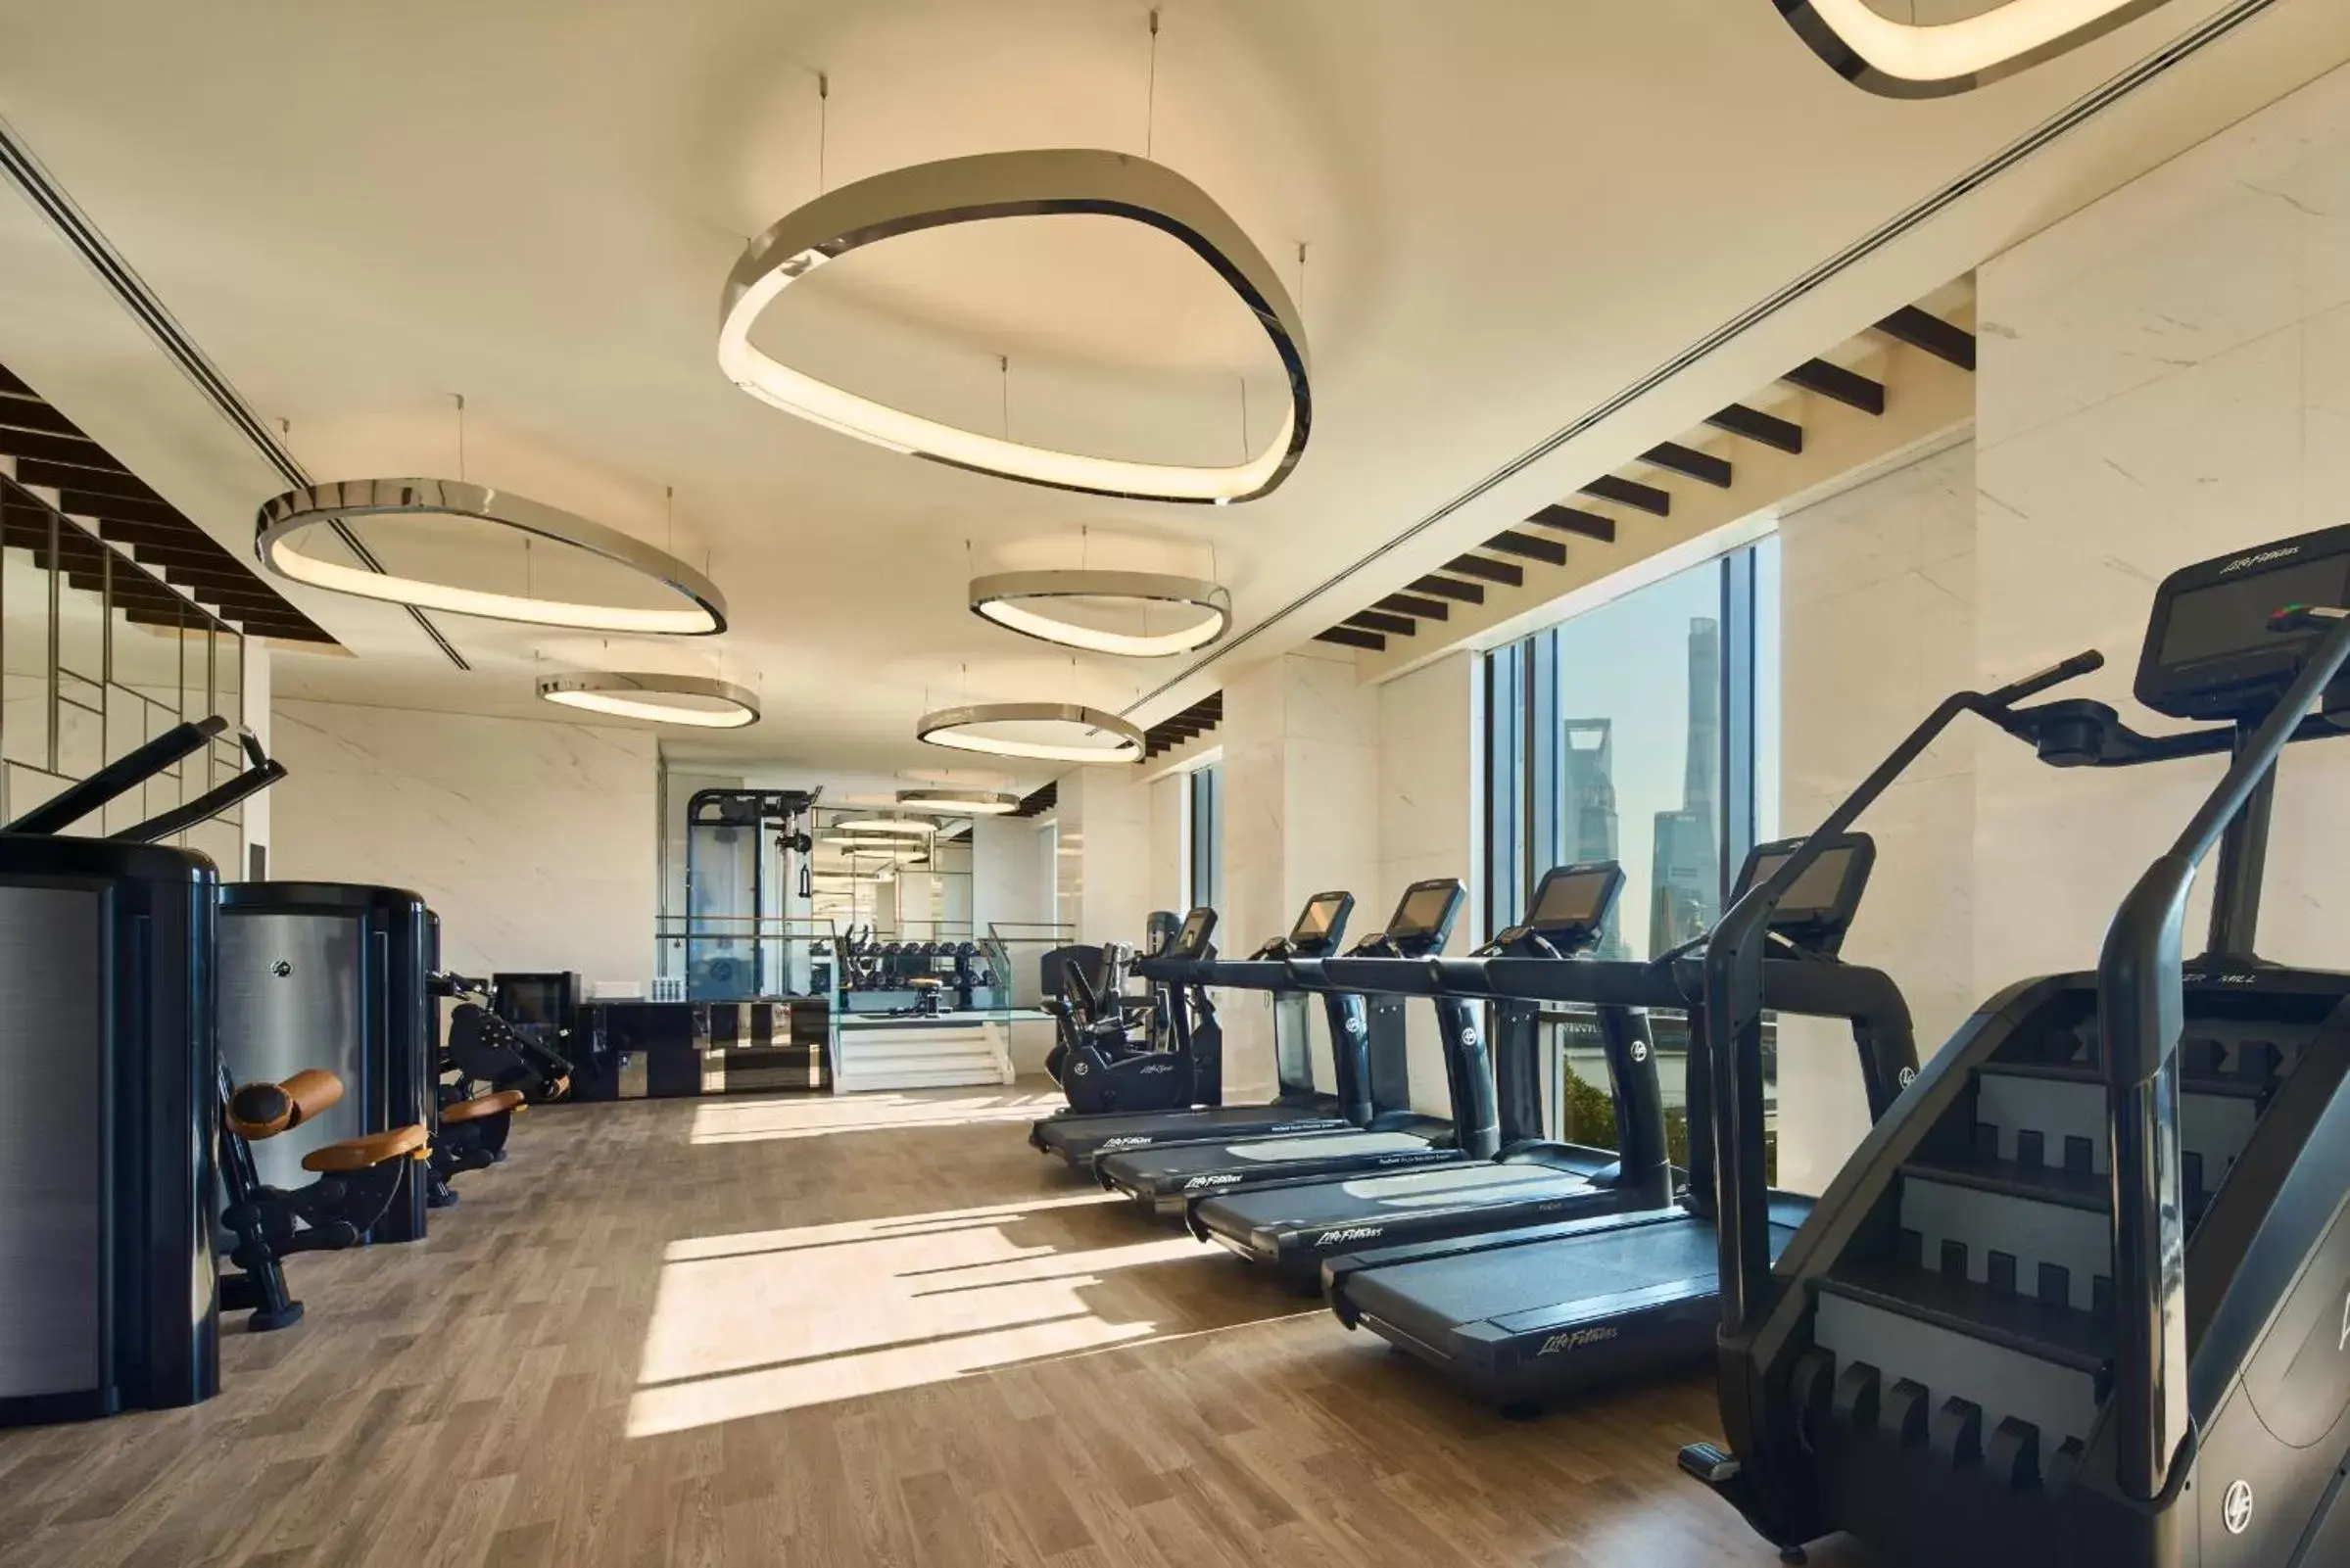 Fitness centre/facilities, Fitness Center/Facilities in Bellagio by MGM Shanghai - on the bund